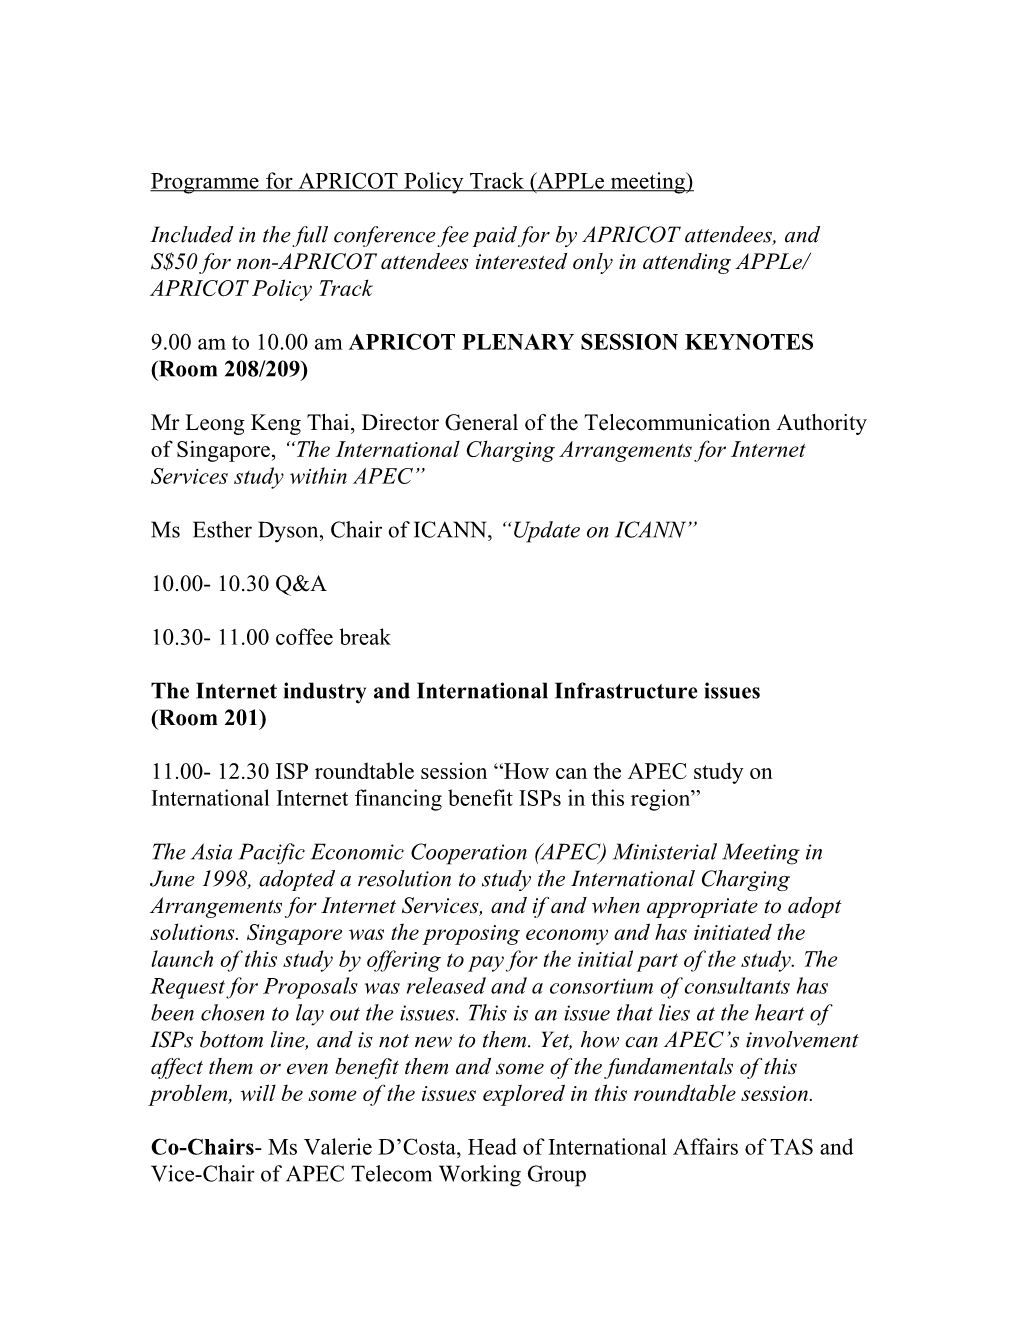 Programme for APRICOT Policy Track (Apple Meeting)